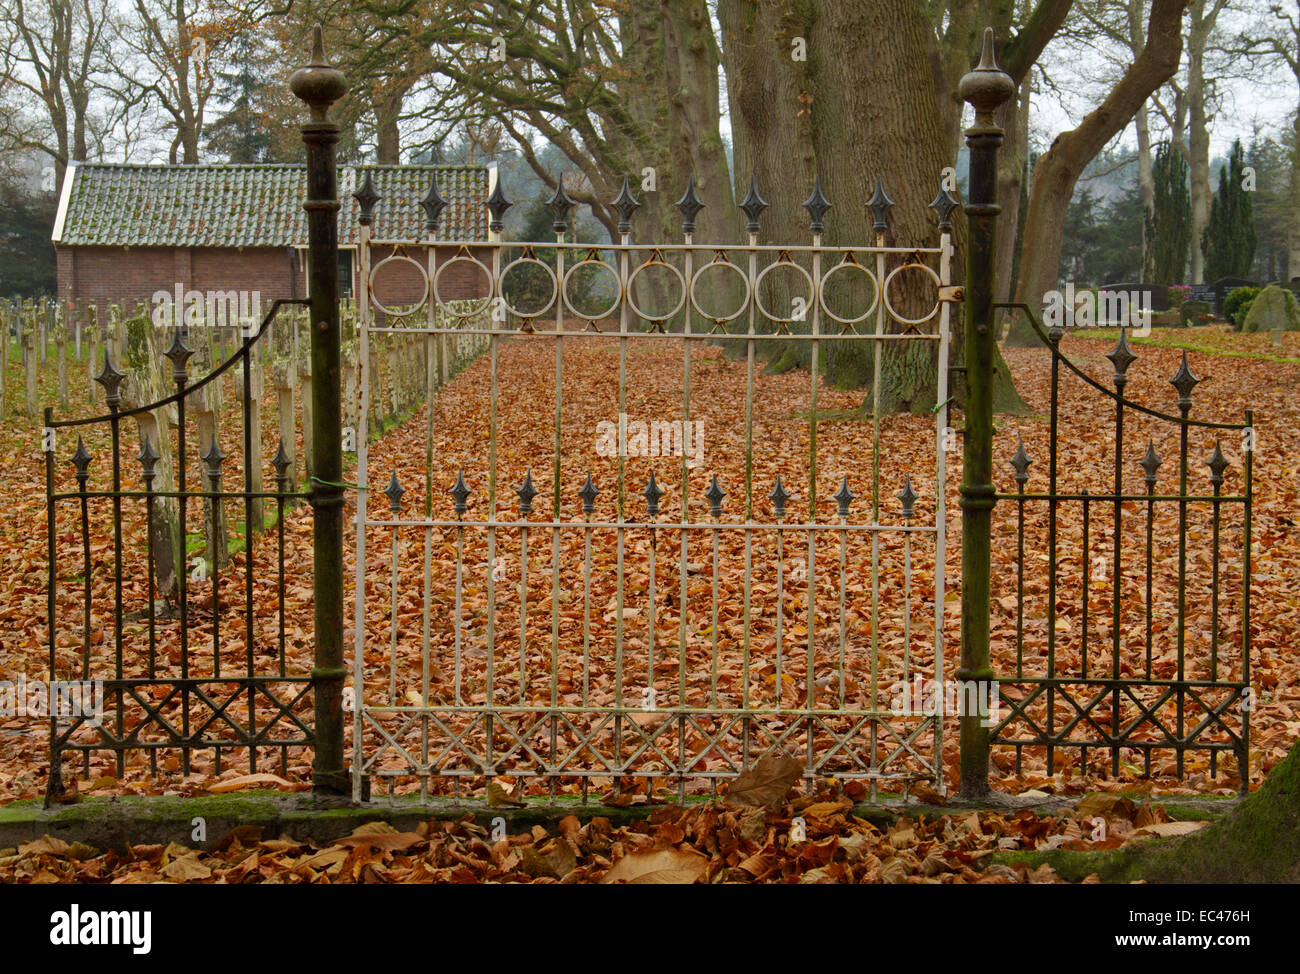 Forged iron gate of a cemetery between Beeches in autumn Stock Photo